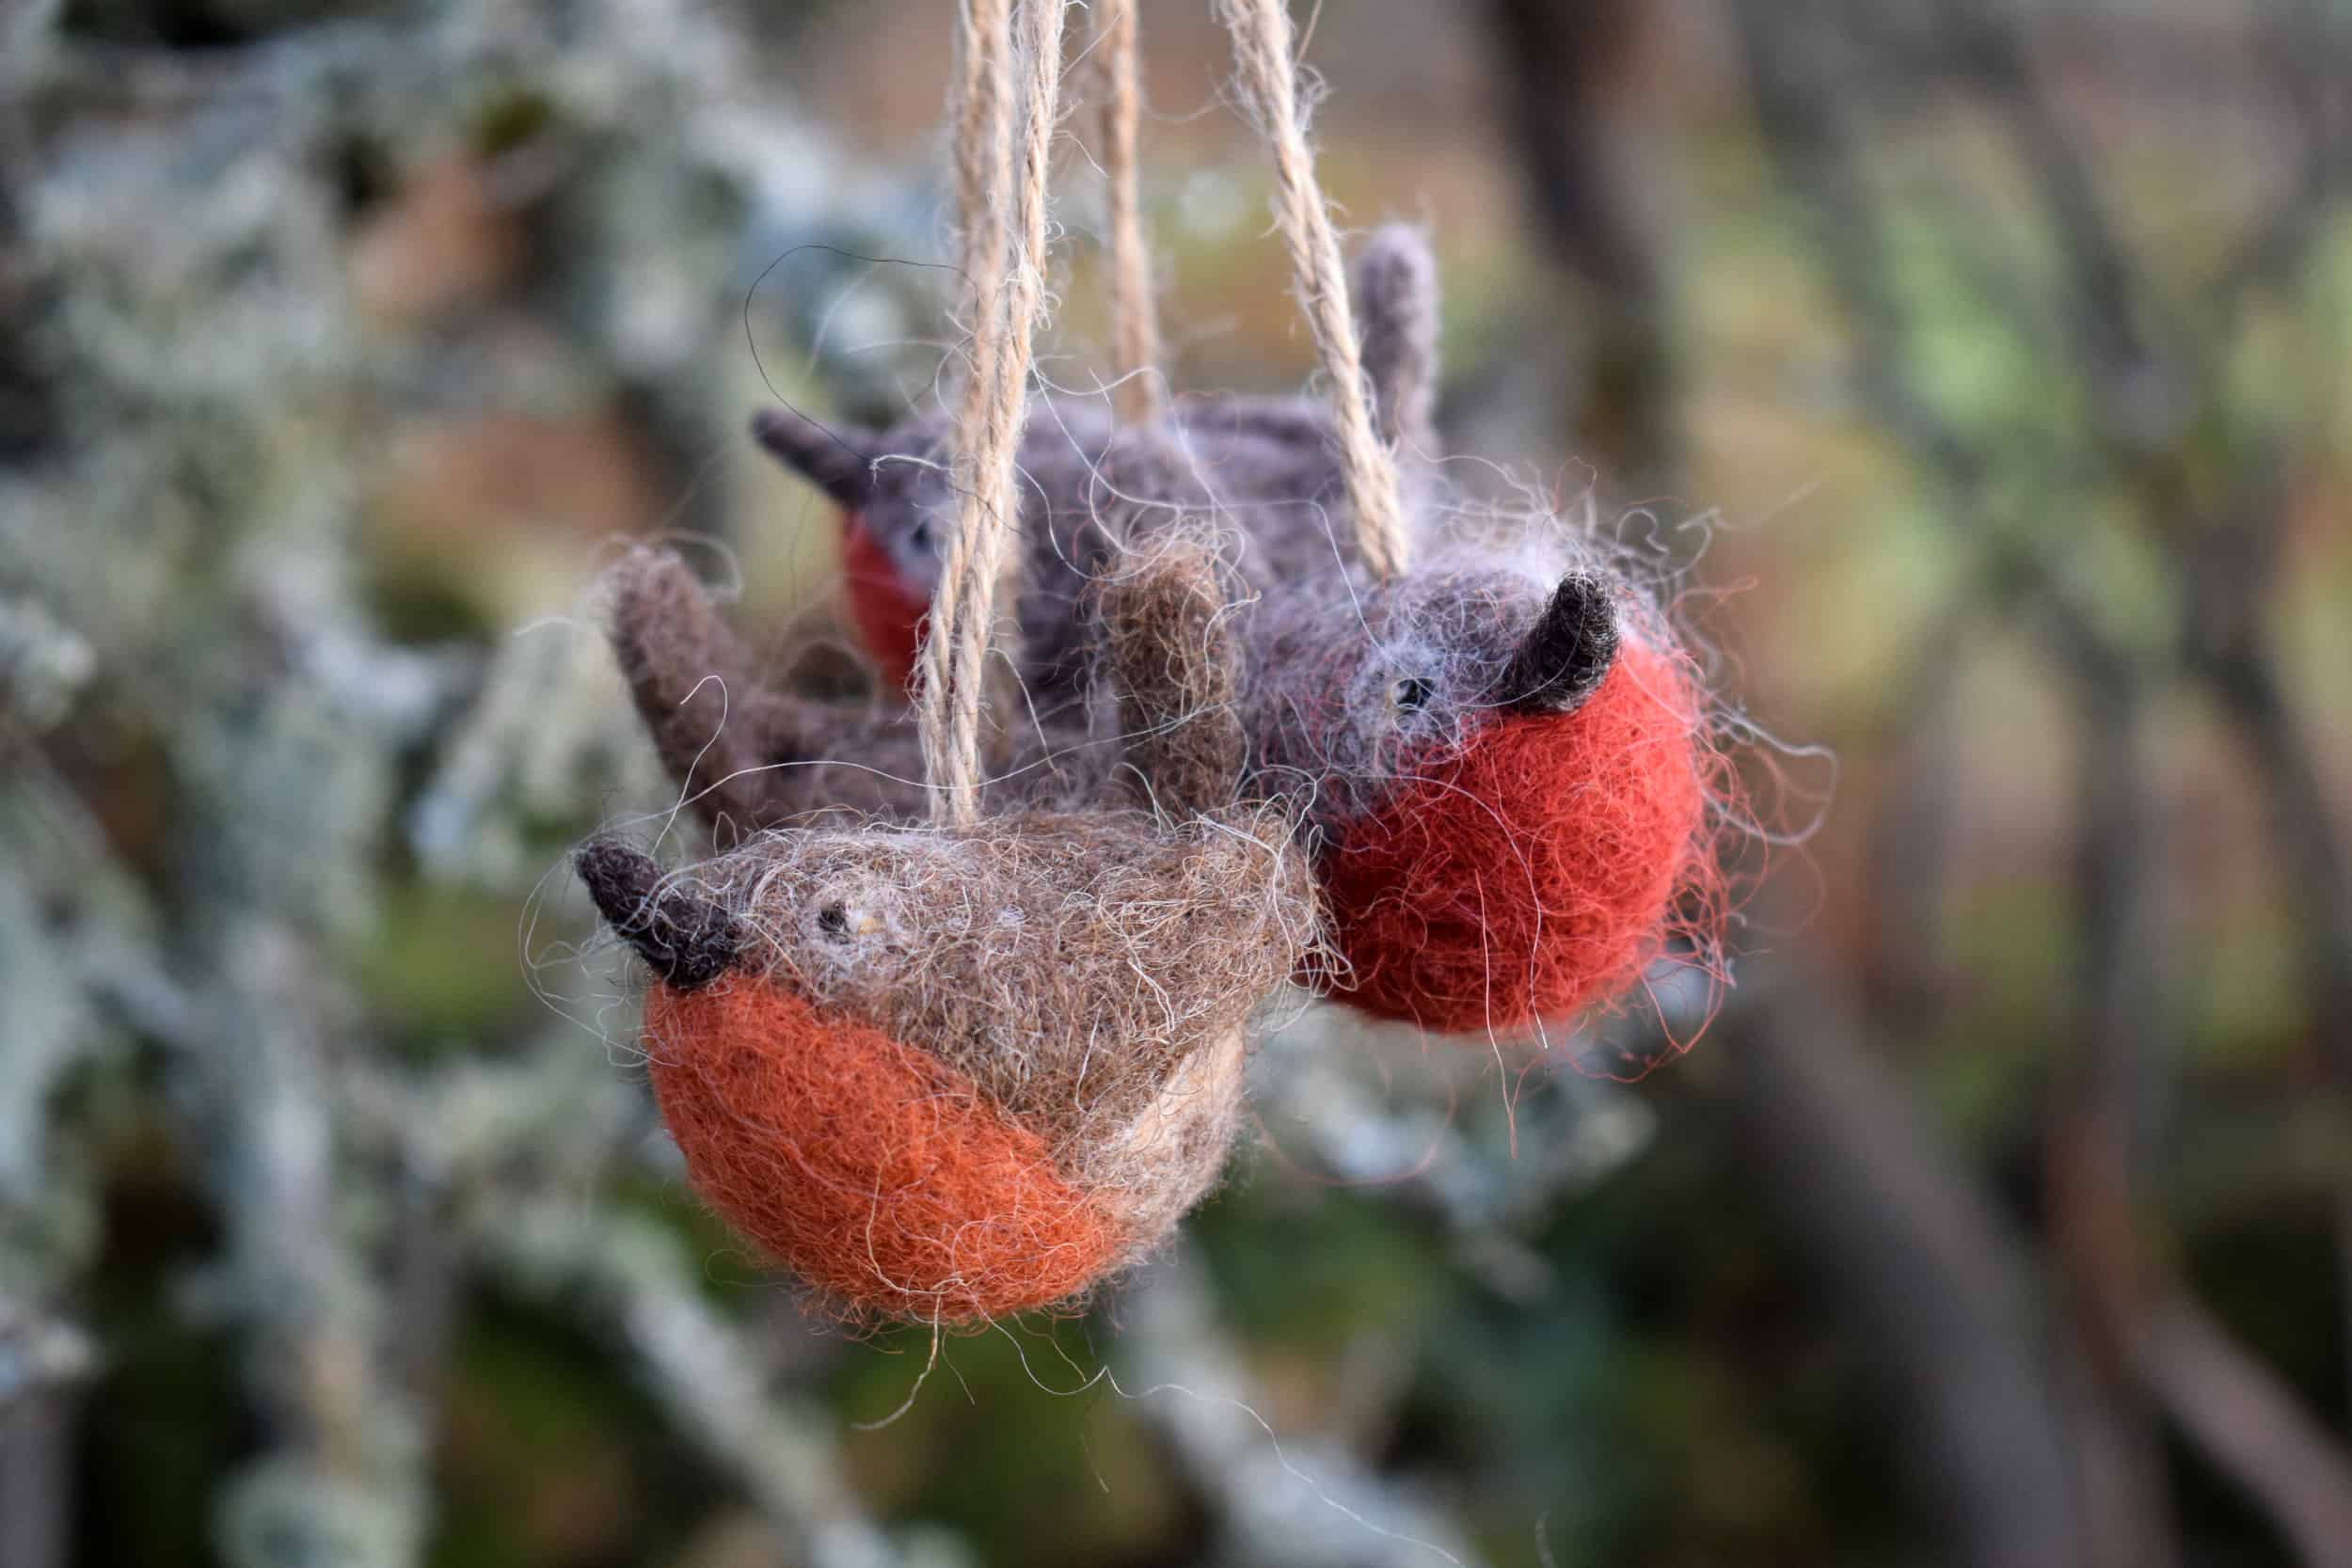 Cute Felted Robin Bauble Christmas Decoration